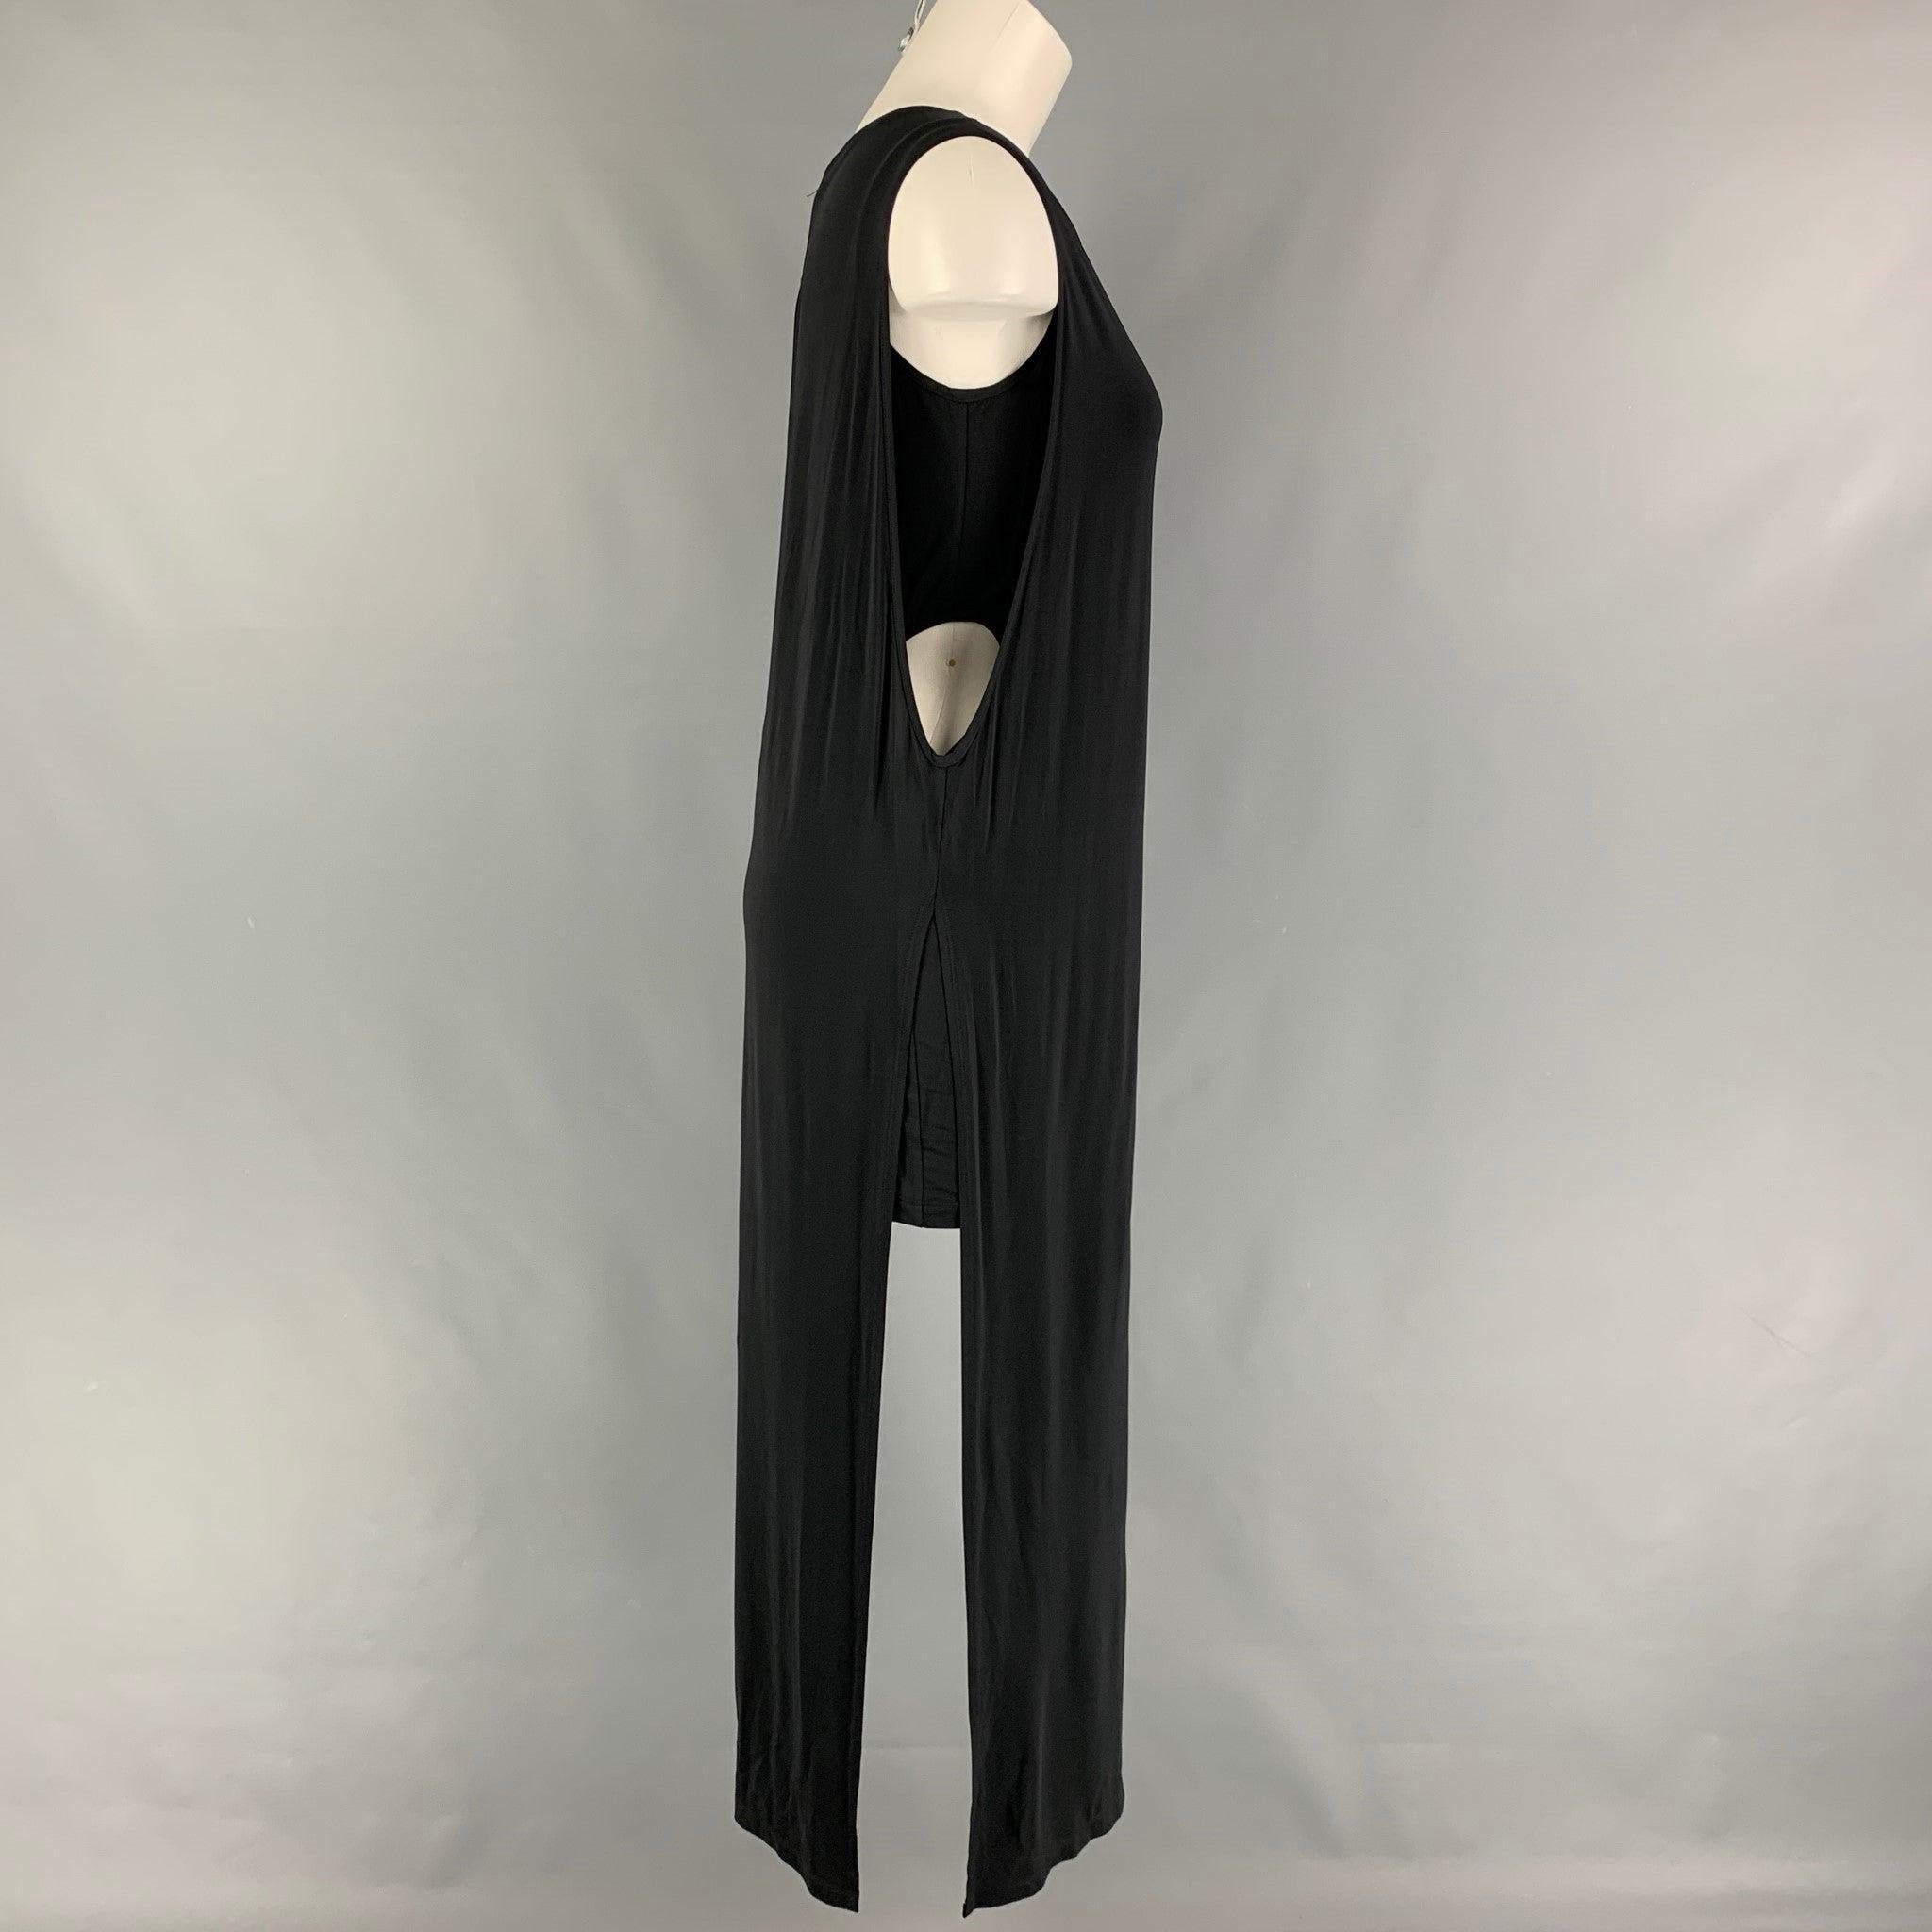 HELMUT LANG dress comes in a black jersey featuring a shift style, sleeveless, back cut-out detail, and a high slit design.
New With Tags.
 

Marked:   S 

Measurements: 
 
Shoulder: 15 inches  Bust: 34 inches  Length: 49.5 inches 
  
  
